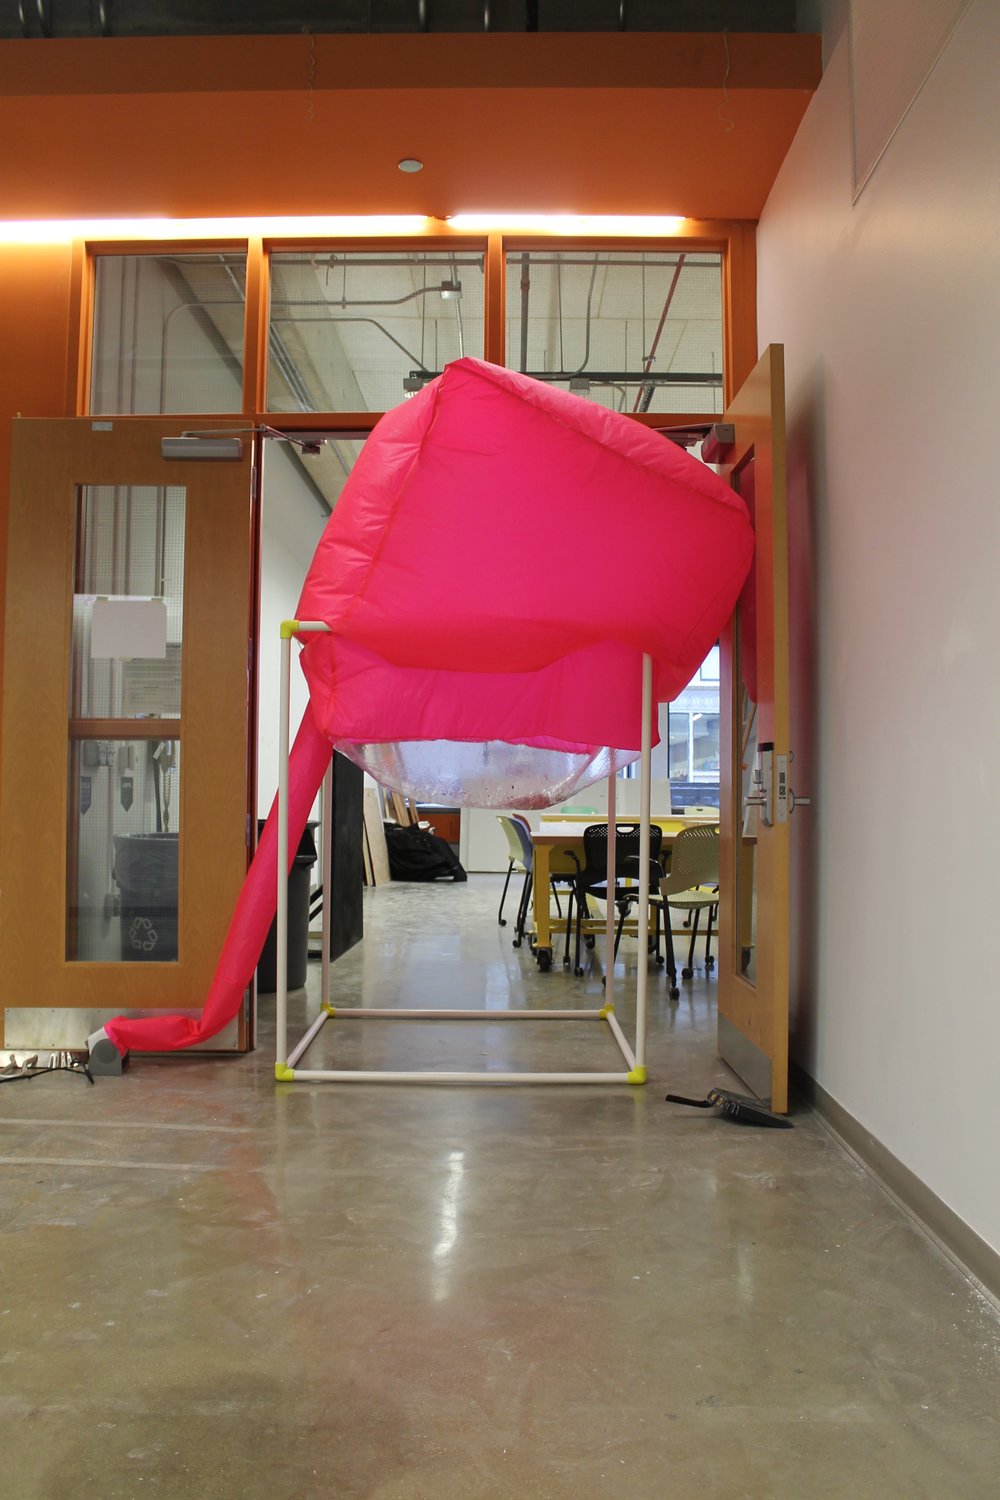 Image: a large pink inflated cube sits atop a white PVC structure; it is positioned in a doorway. "Negotiating Space: Othered by Design" by Bri Beck, courtesy of the artist.